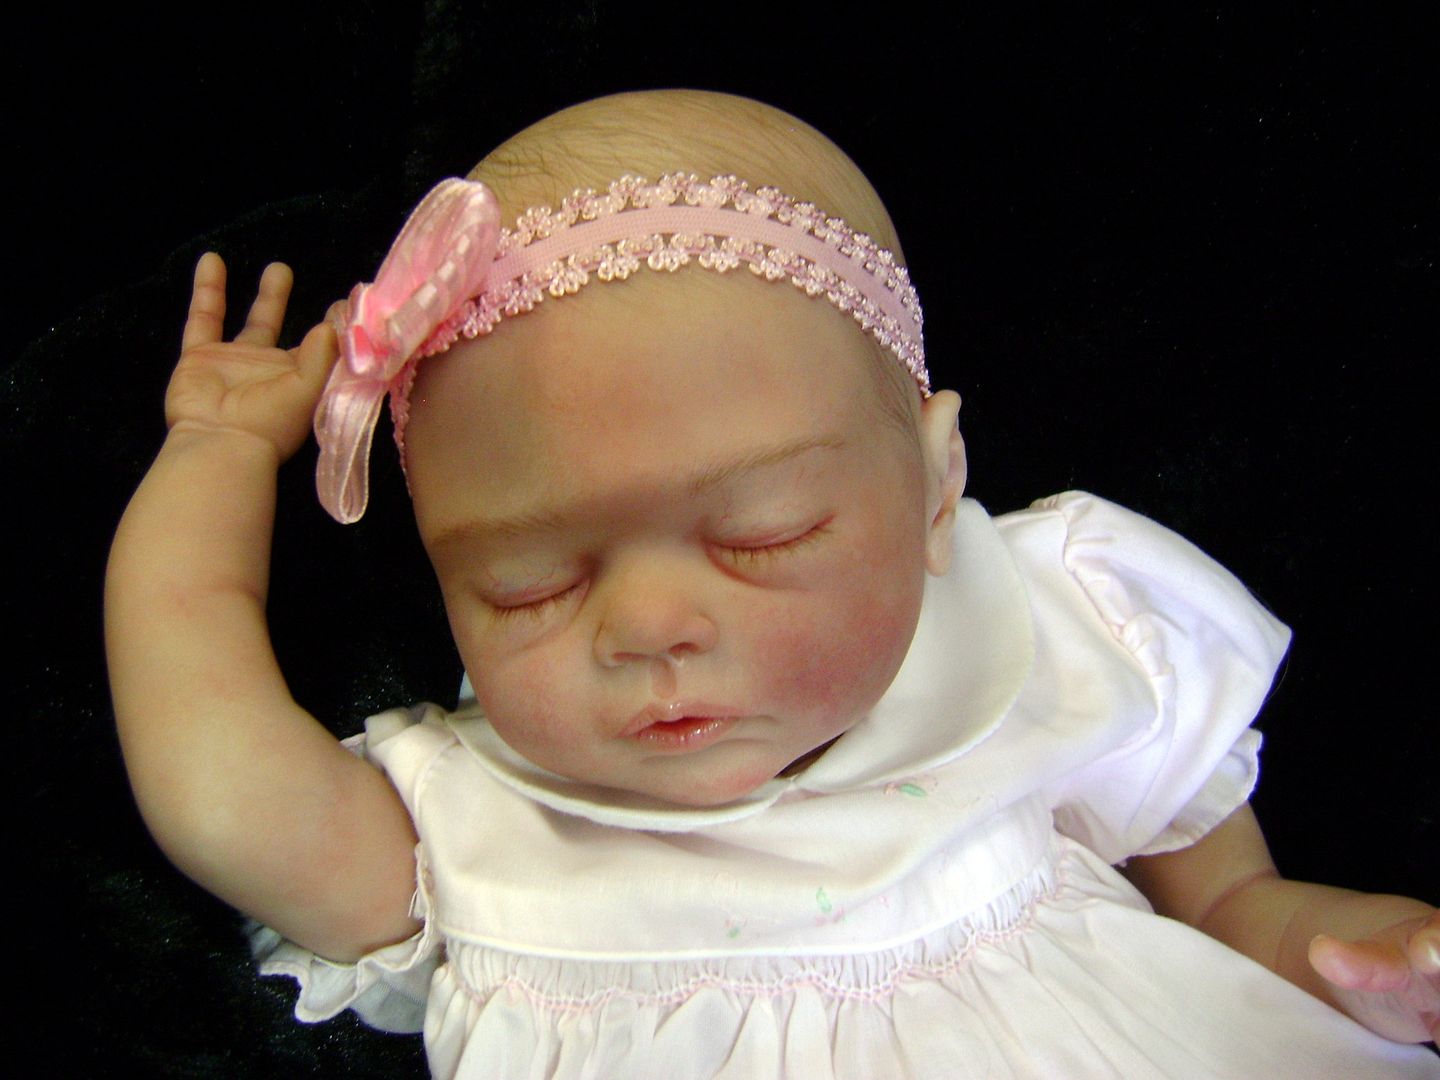 New Sculpt Limited Beautiful Reborn Baby Doll Amiah by Melody Hess Signed Body